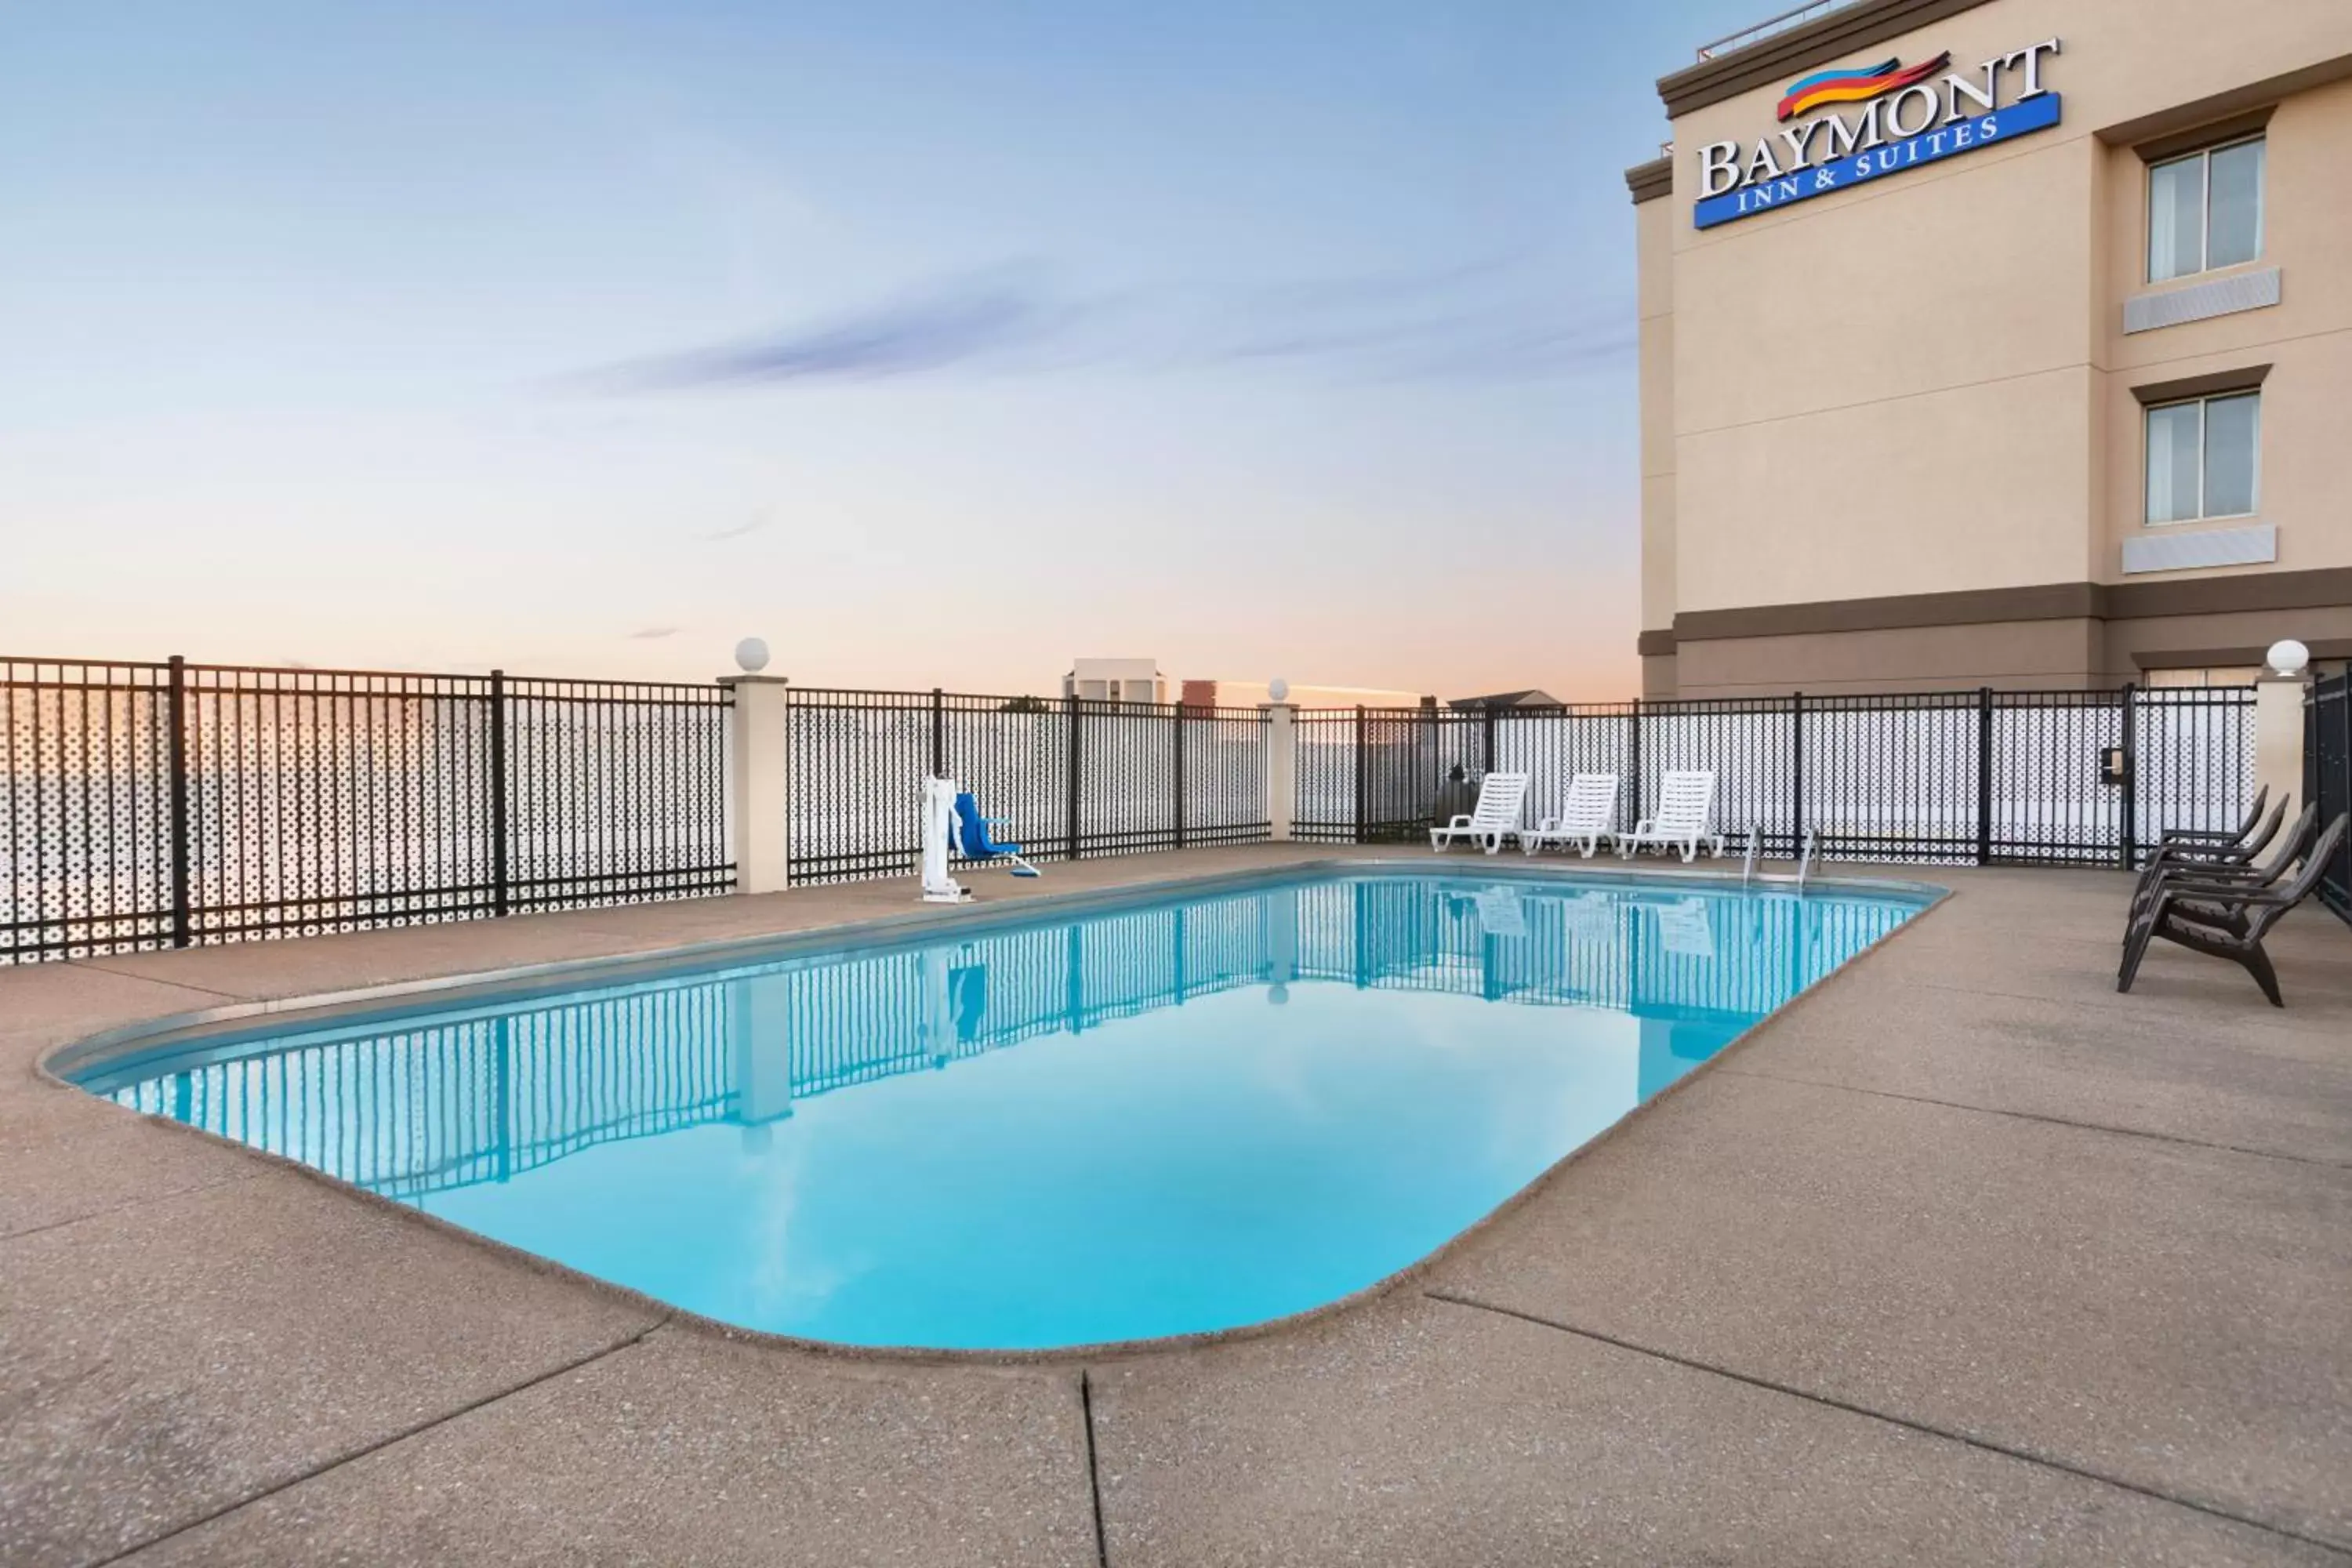 Swimming Pool in Baymont by Wyndham Evansville East